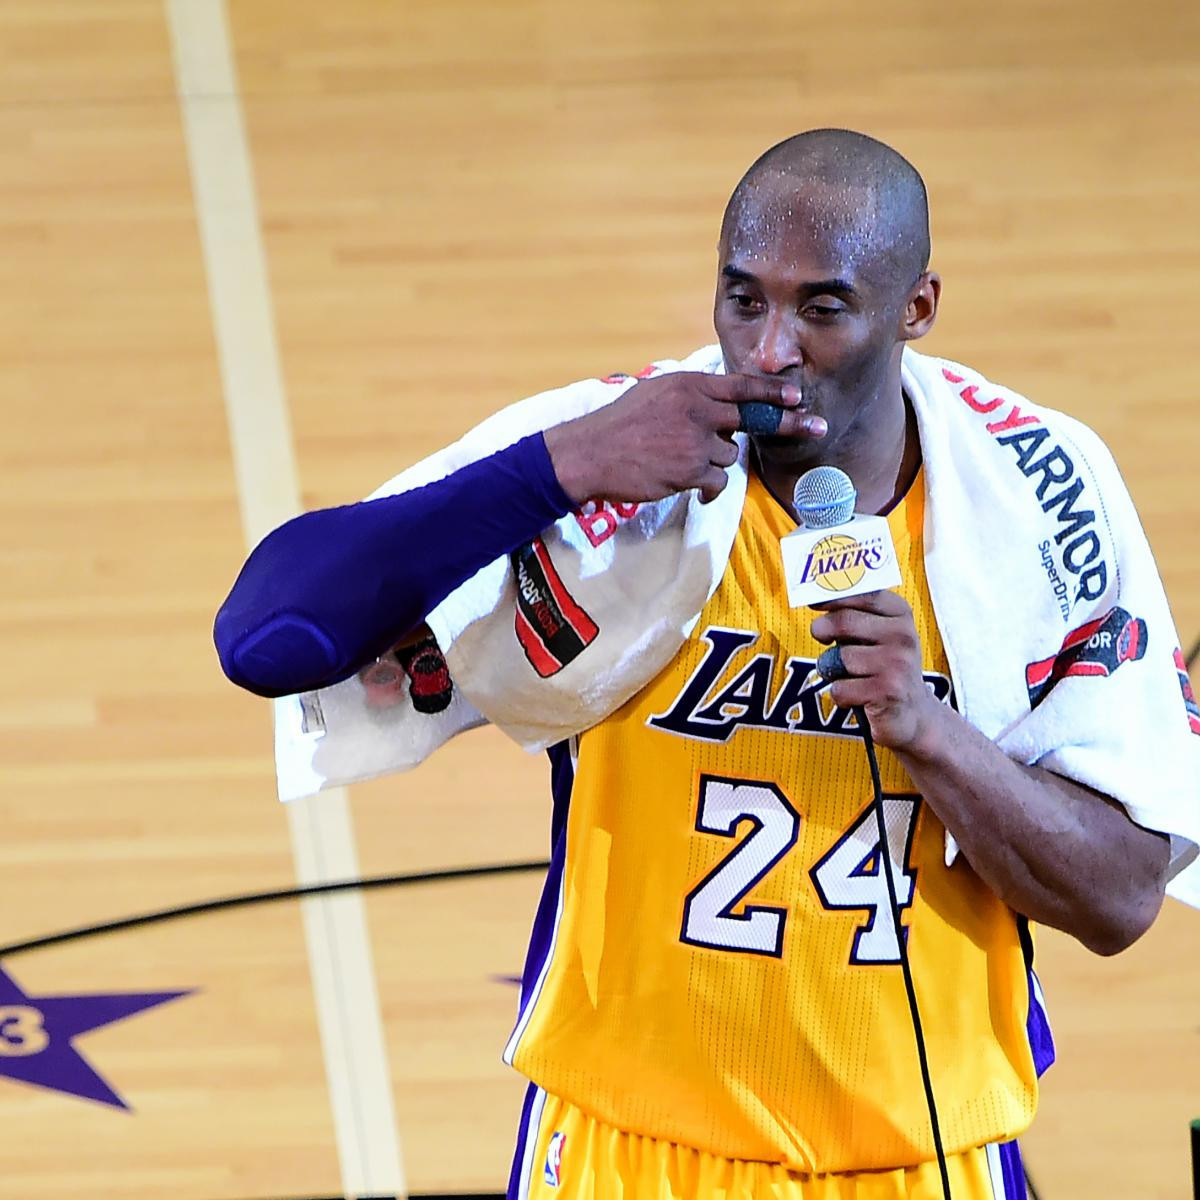 Following his death in January this year, a collector paid more than $33,000 for a towel Kobe Bryant used following his farewell NBA appearance for the Los Angeles Lakers in 2016 ©Getty Images